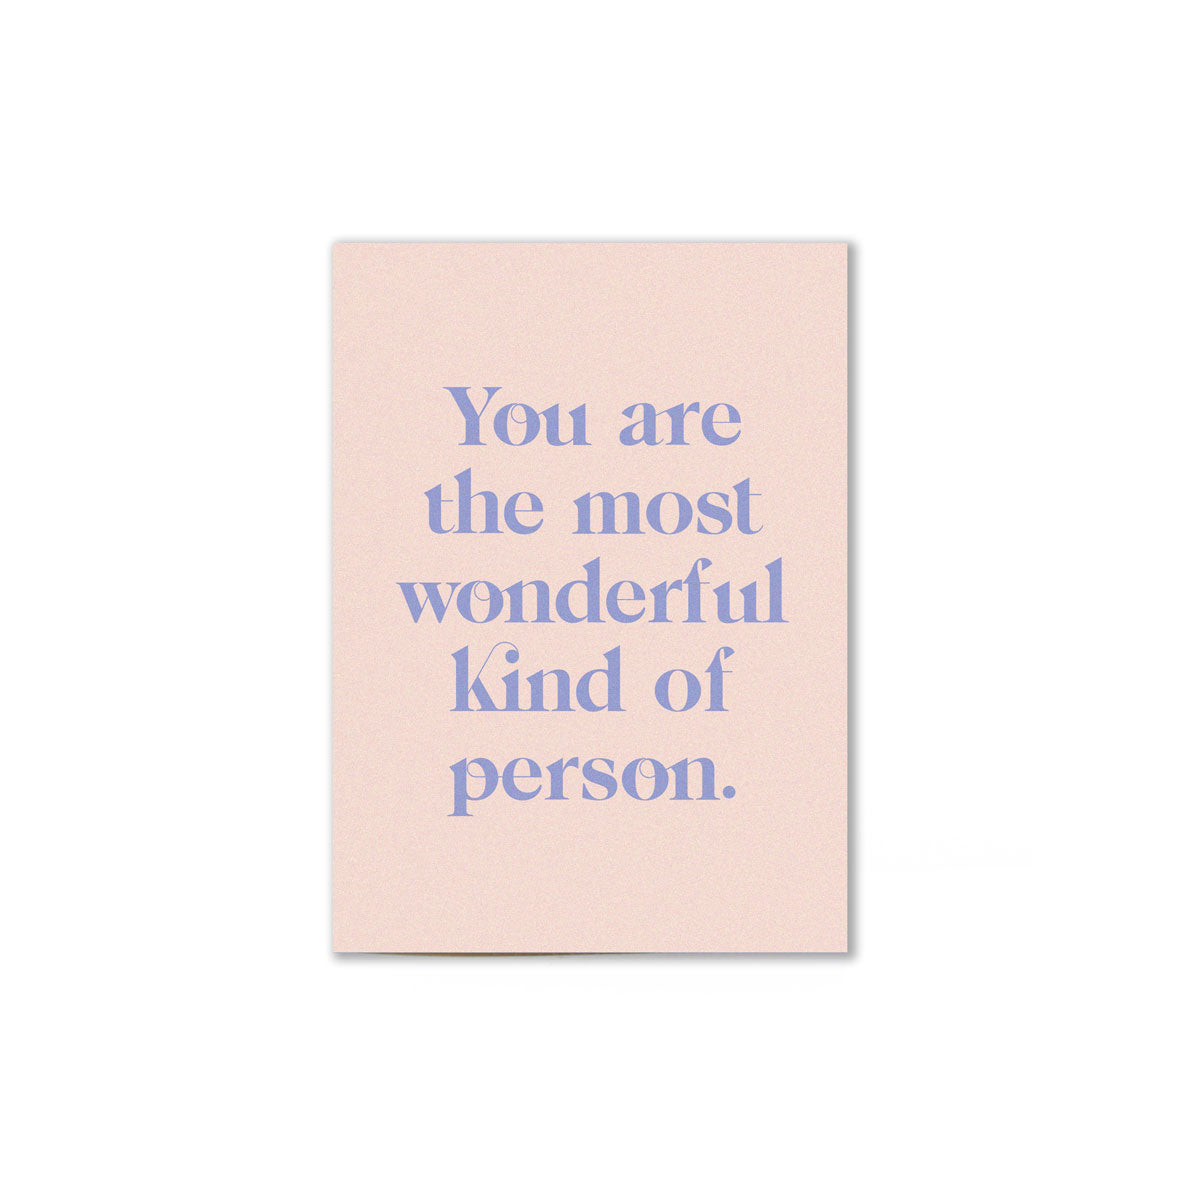 light salmon colored "Wonderful person gratitude card that reads "You are the most wonderful kind of person" in light blue text